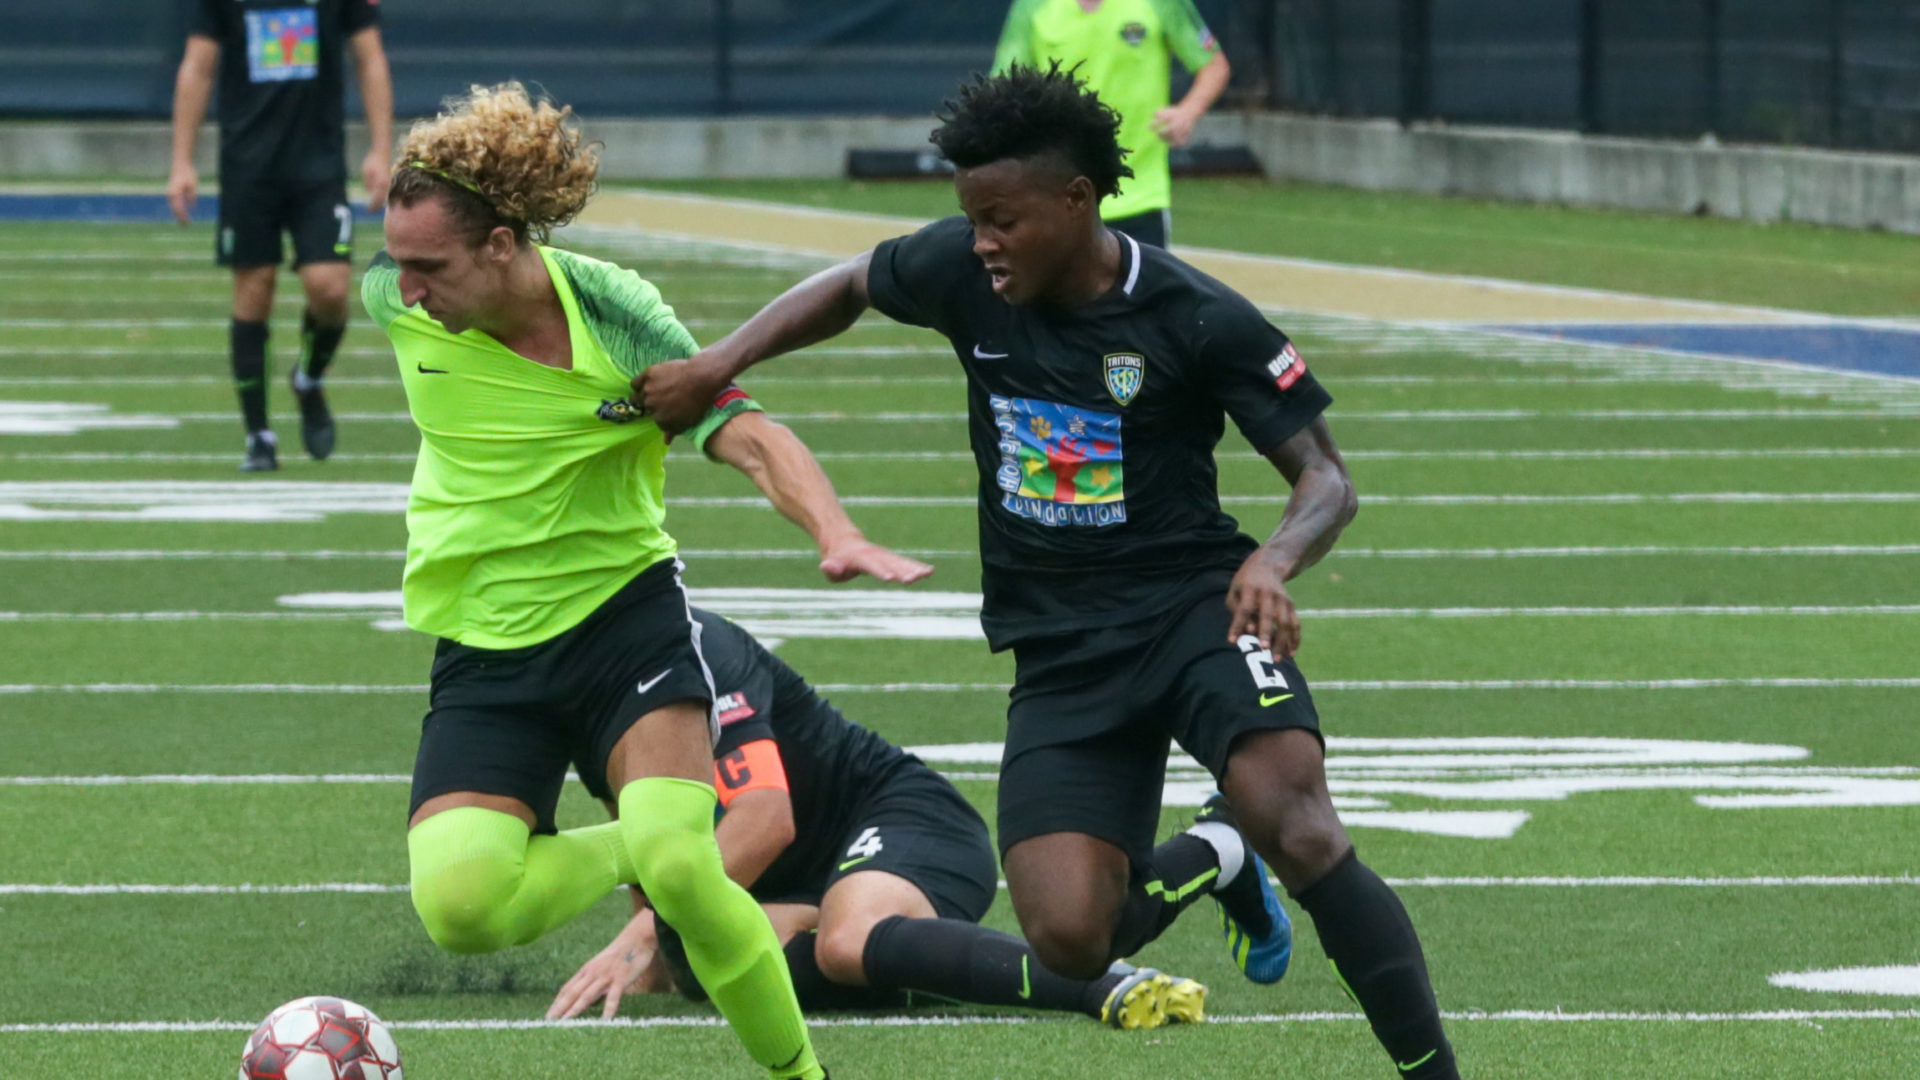 Photos: Florida Elite finishes first USL League Two campaign